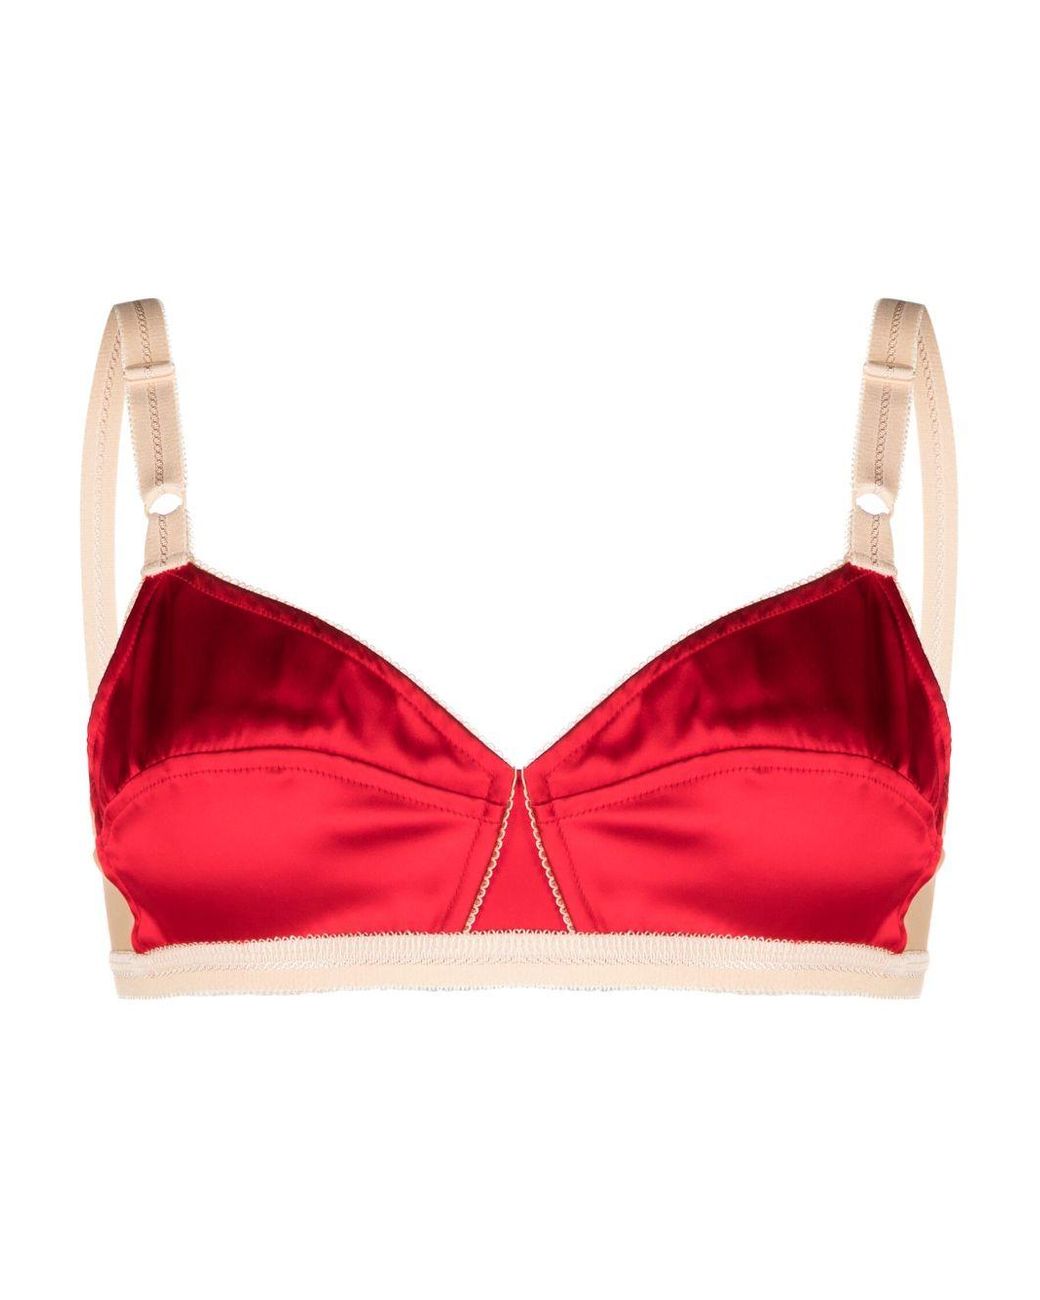 N°21 Two-tone Full-cup Bra in Red